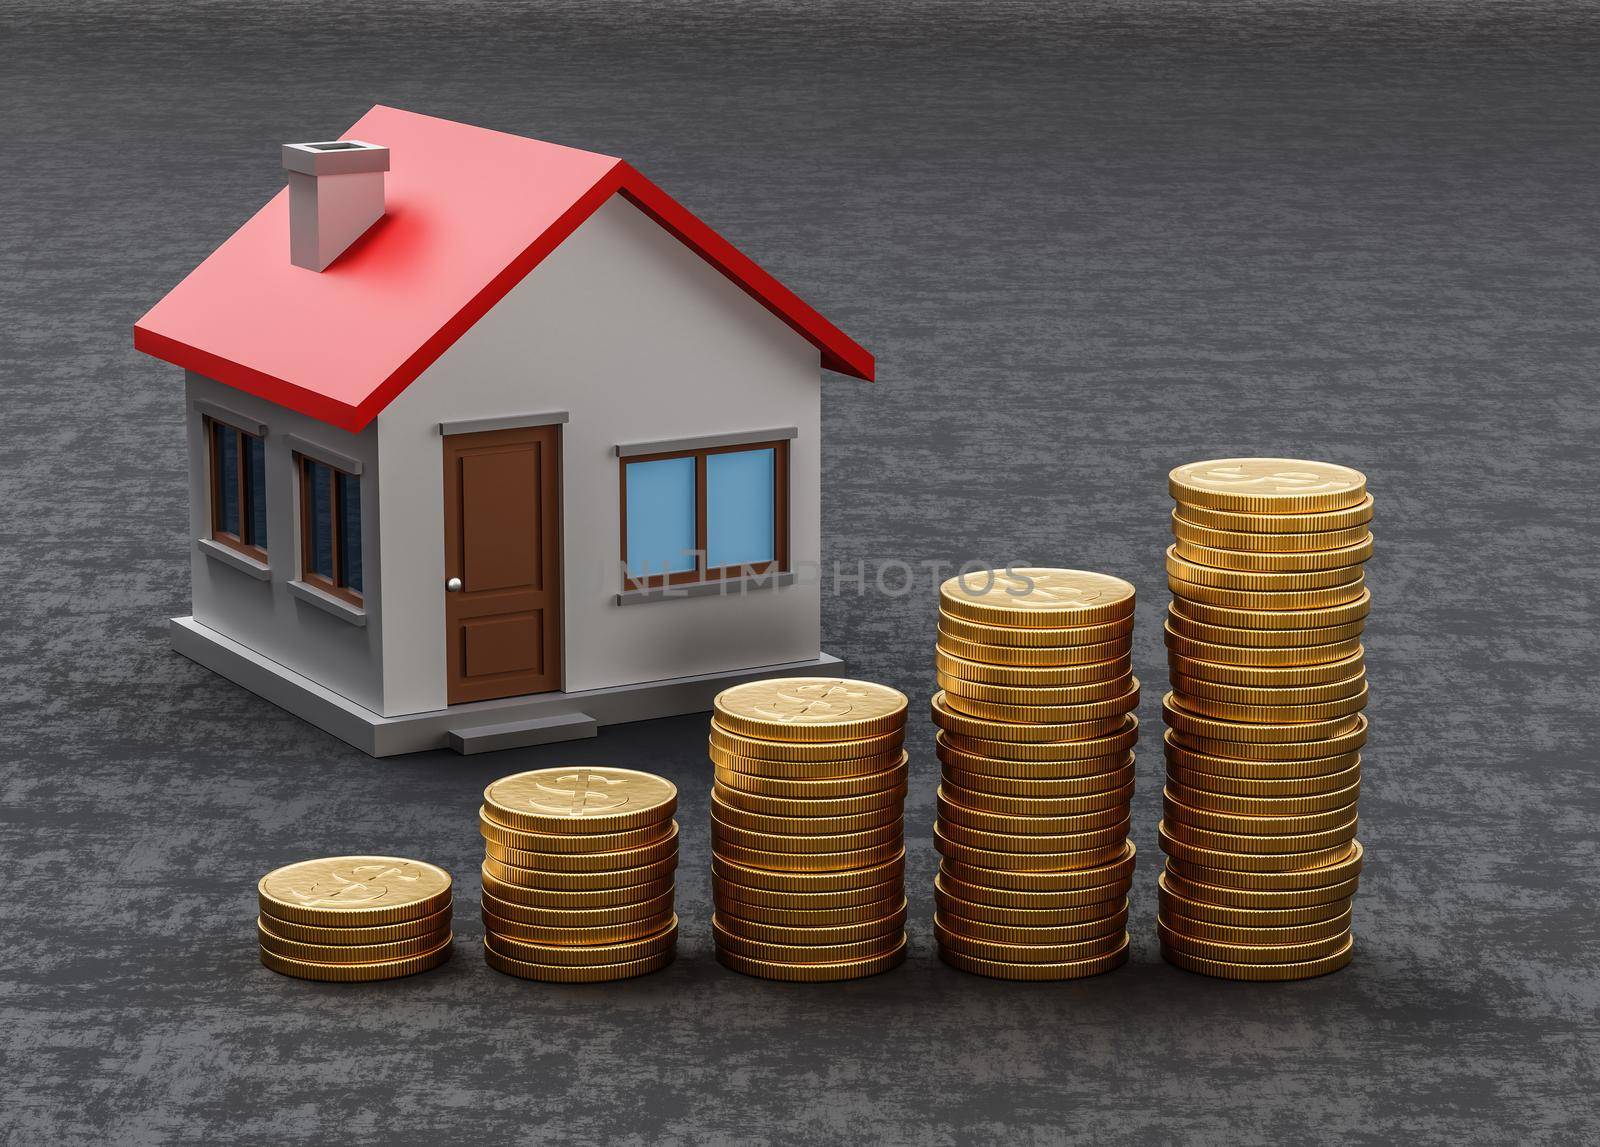 Rising Heaps of Coins on Dark Background with House by make